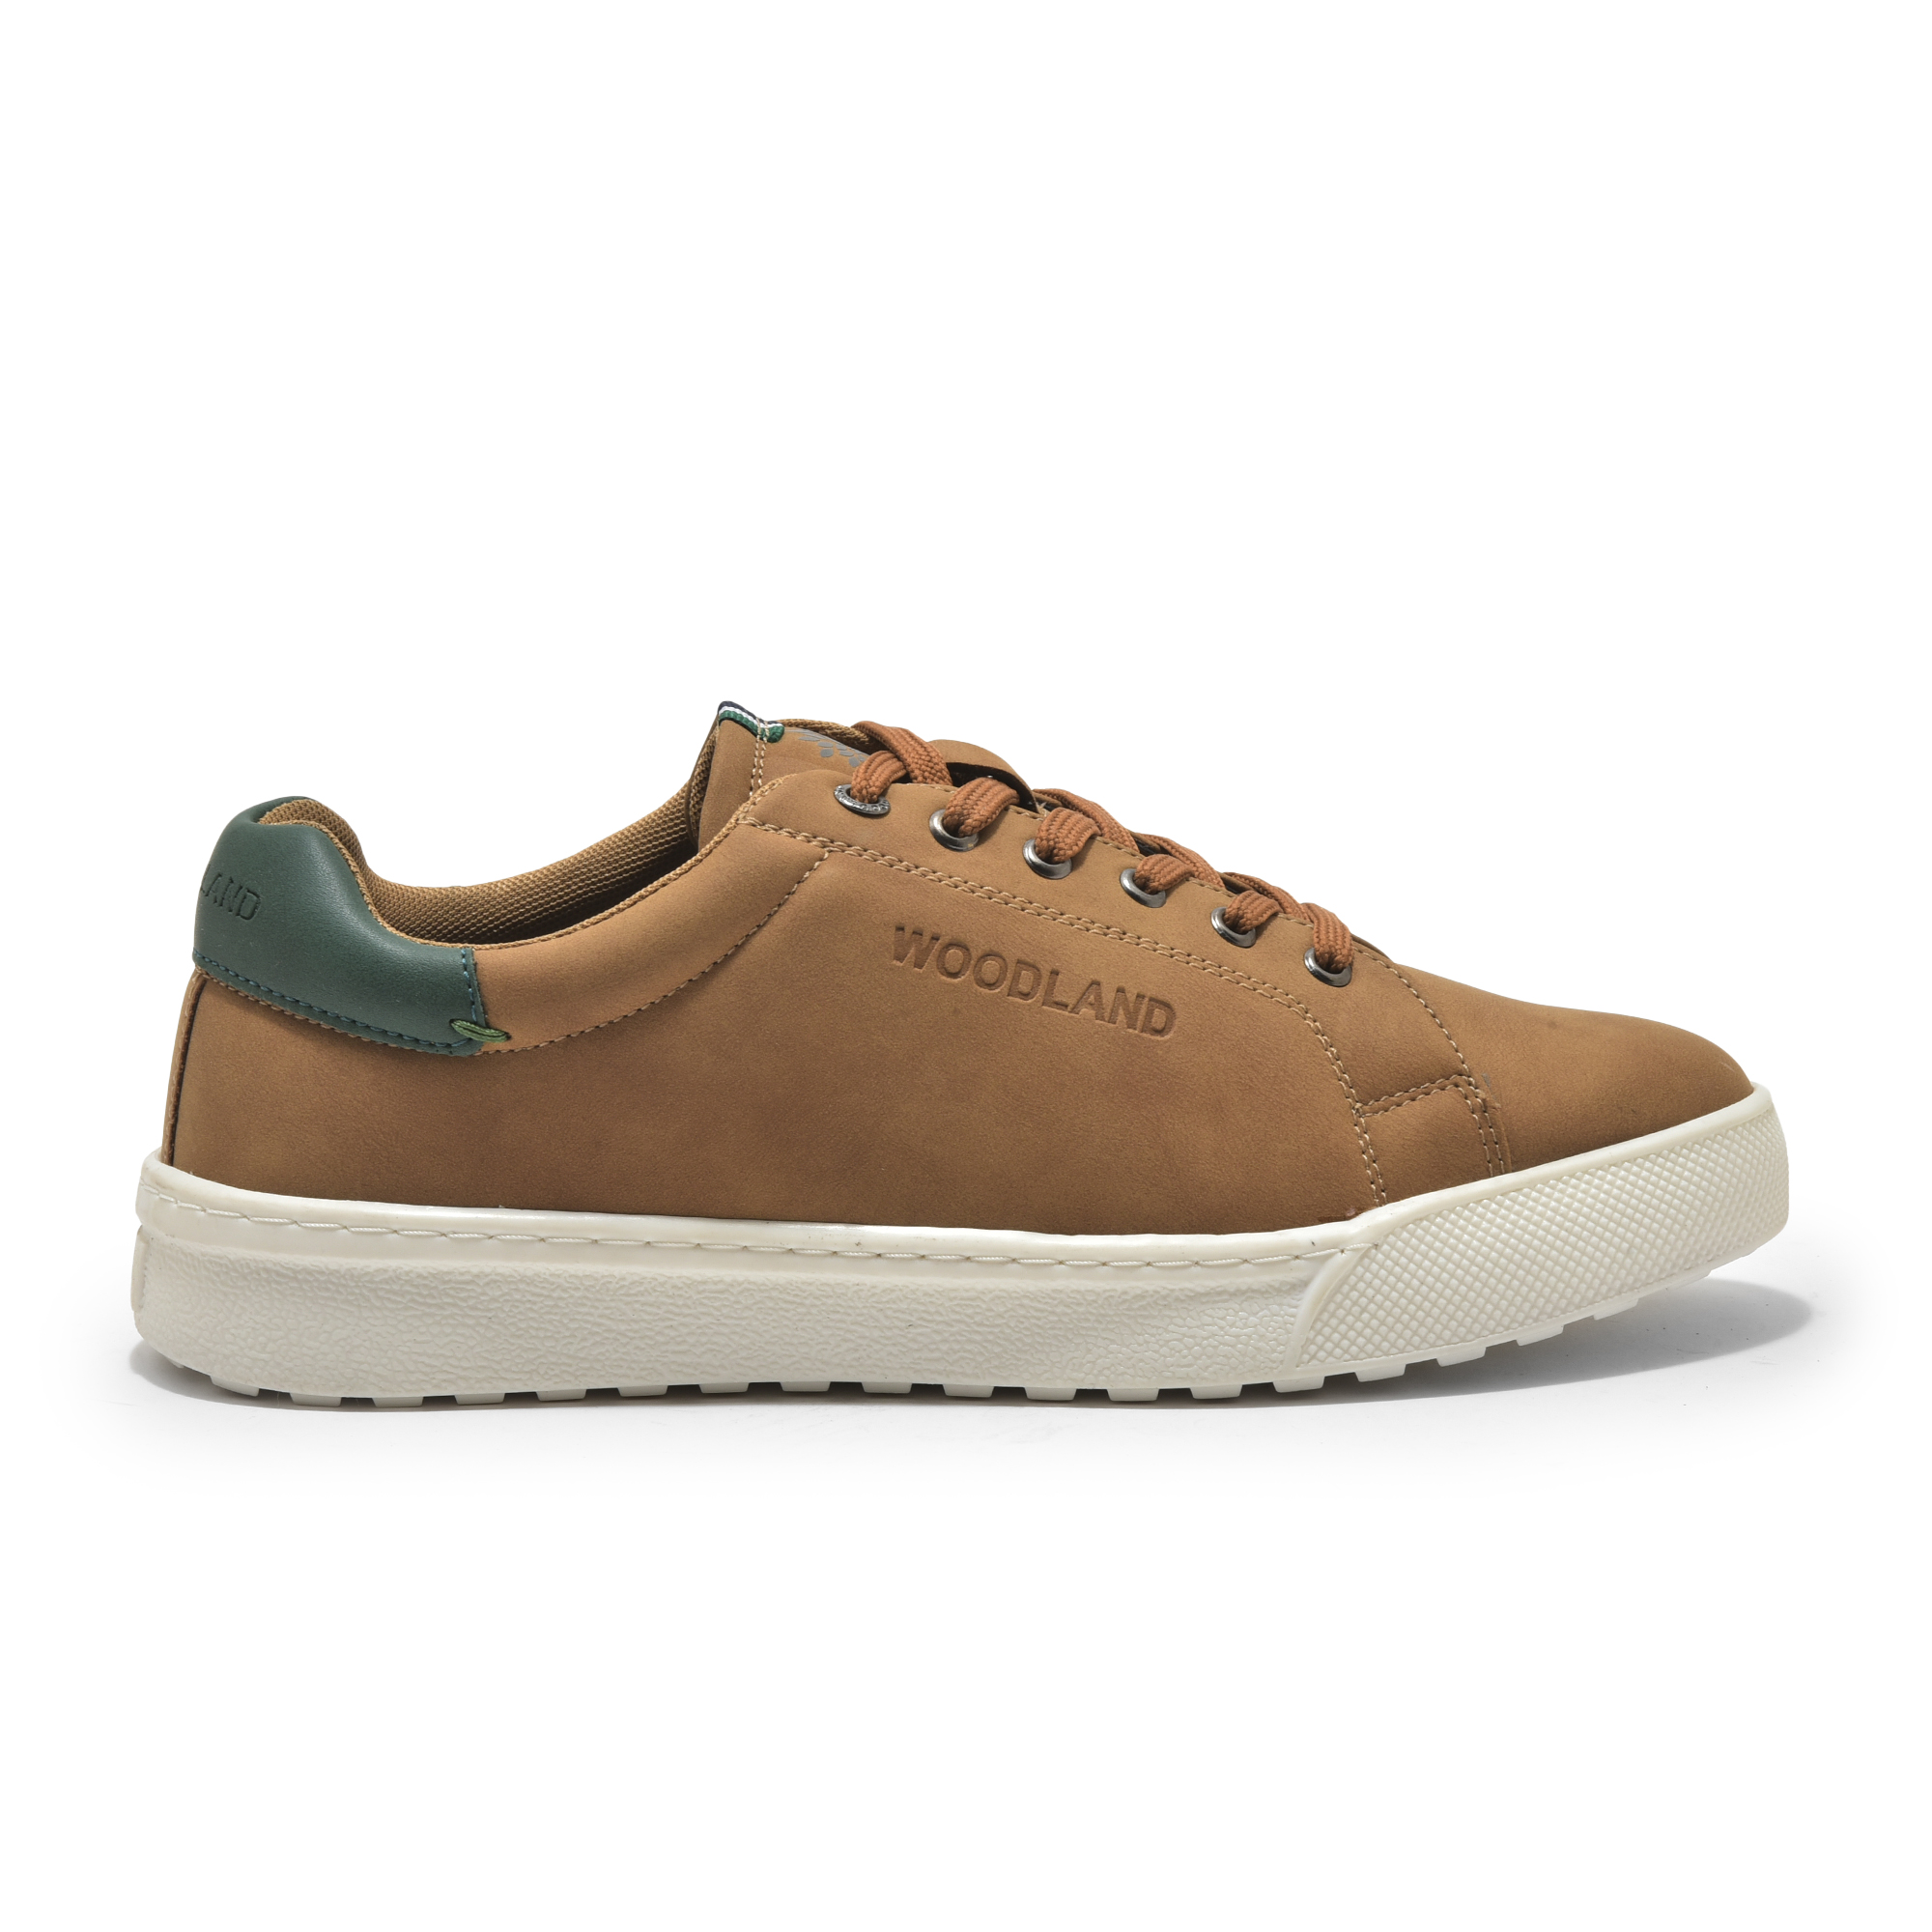 Woodland Mens Shoes Latest Price, Dealers & Suppliers